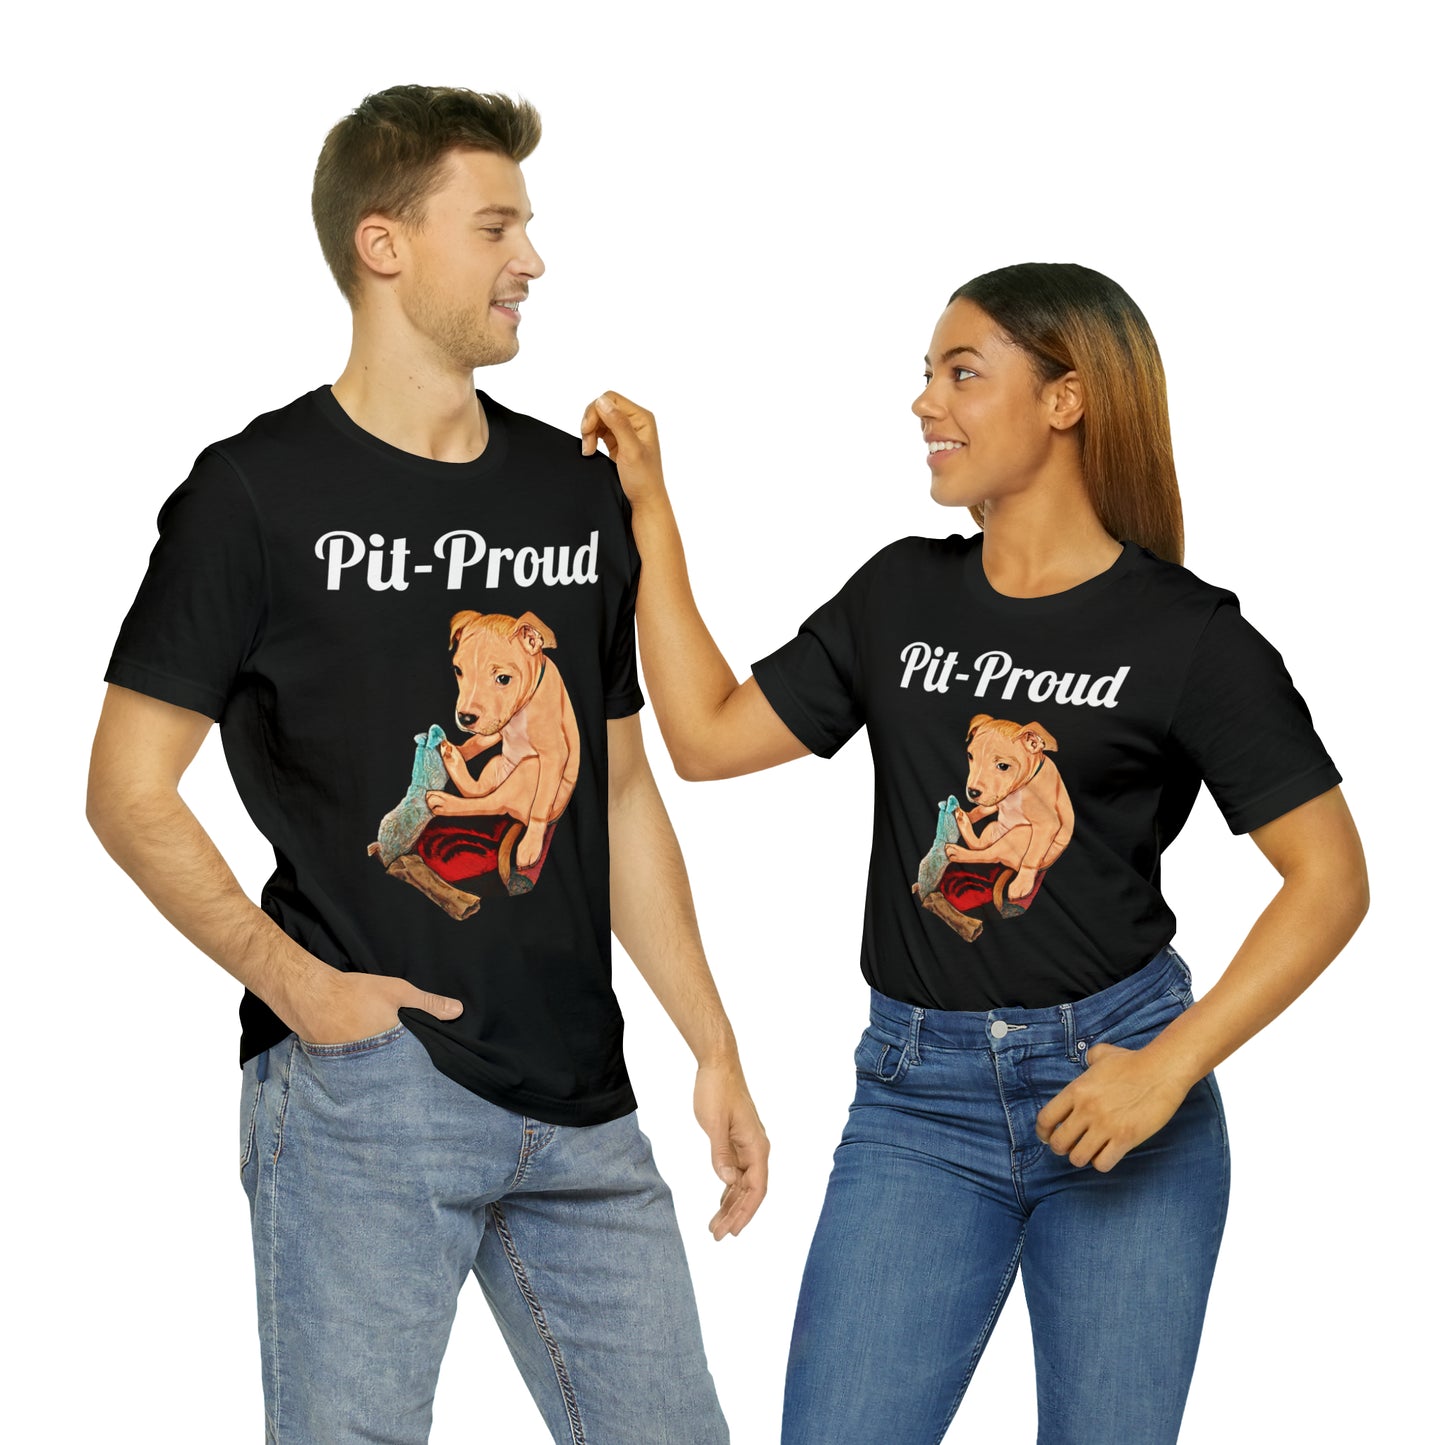 Pit-Proud Puppy Tee